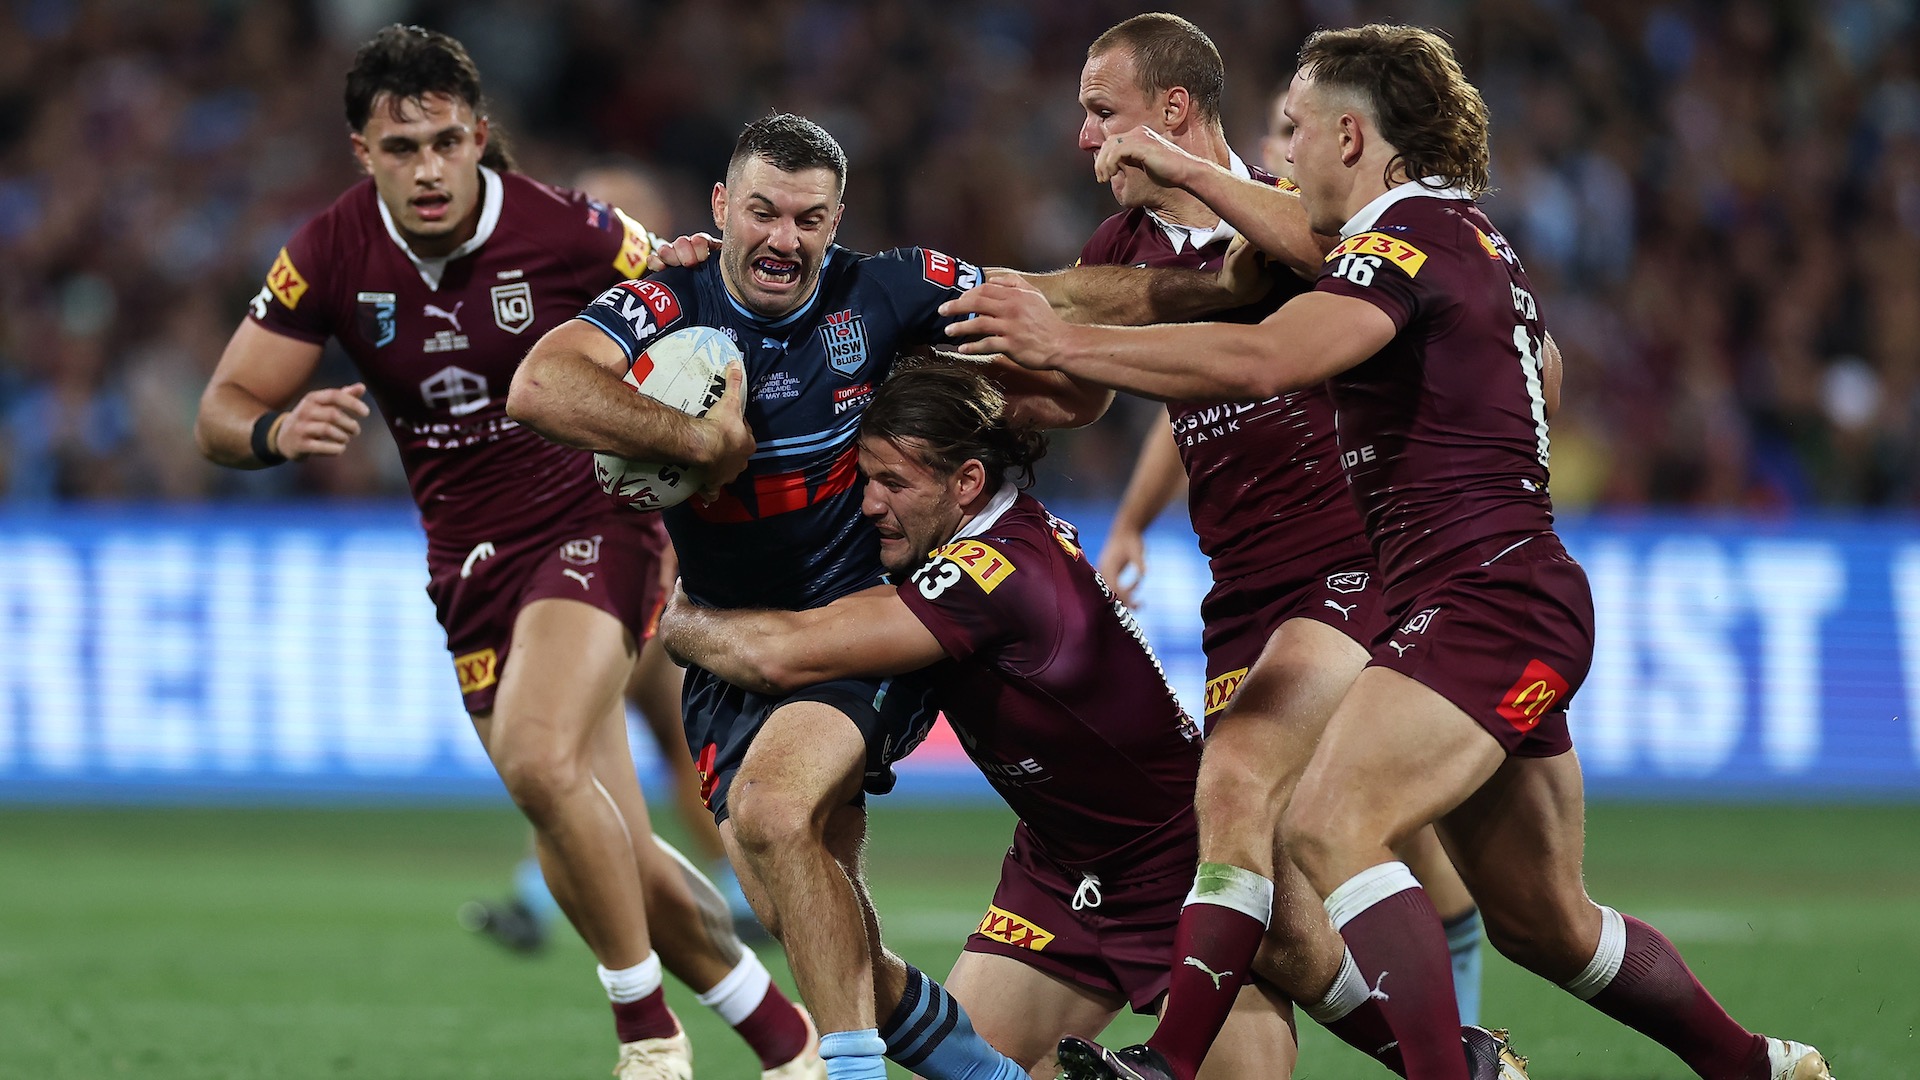 state-of-origin-game-2-live-stream-how-to-watch-nsw-vs-queensland-from